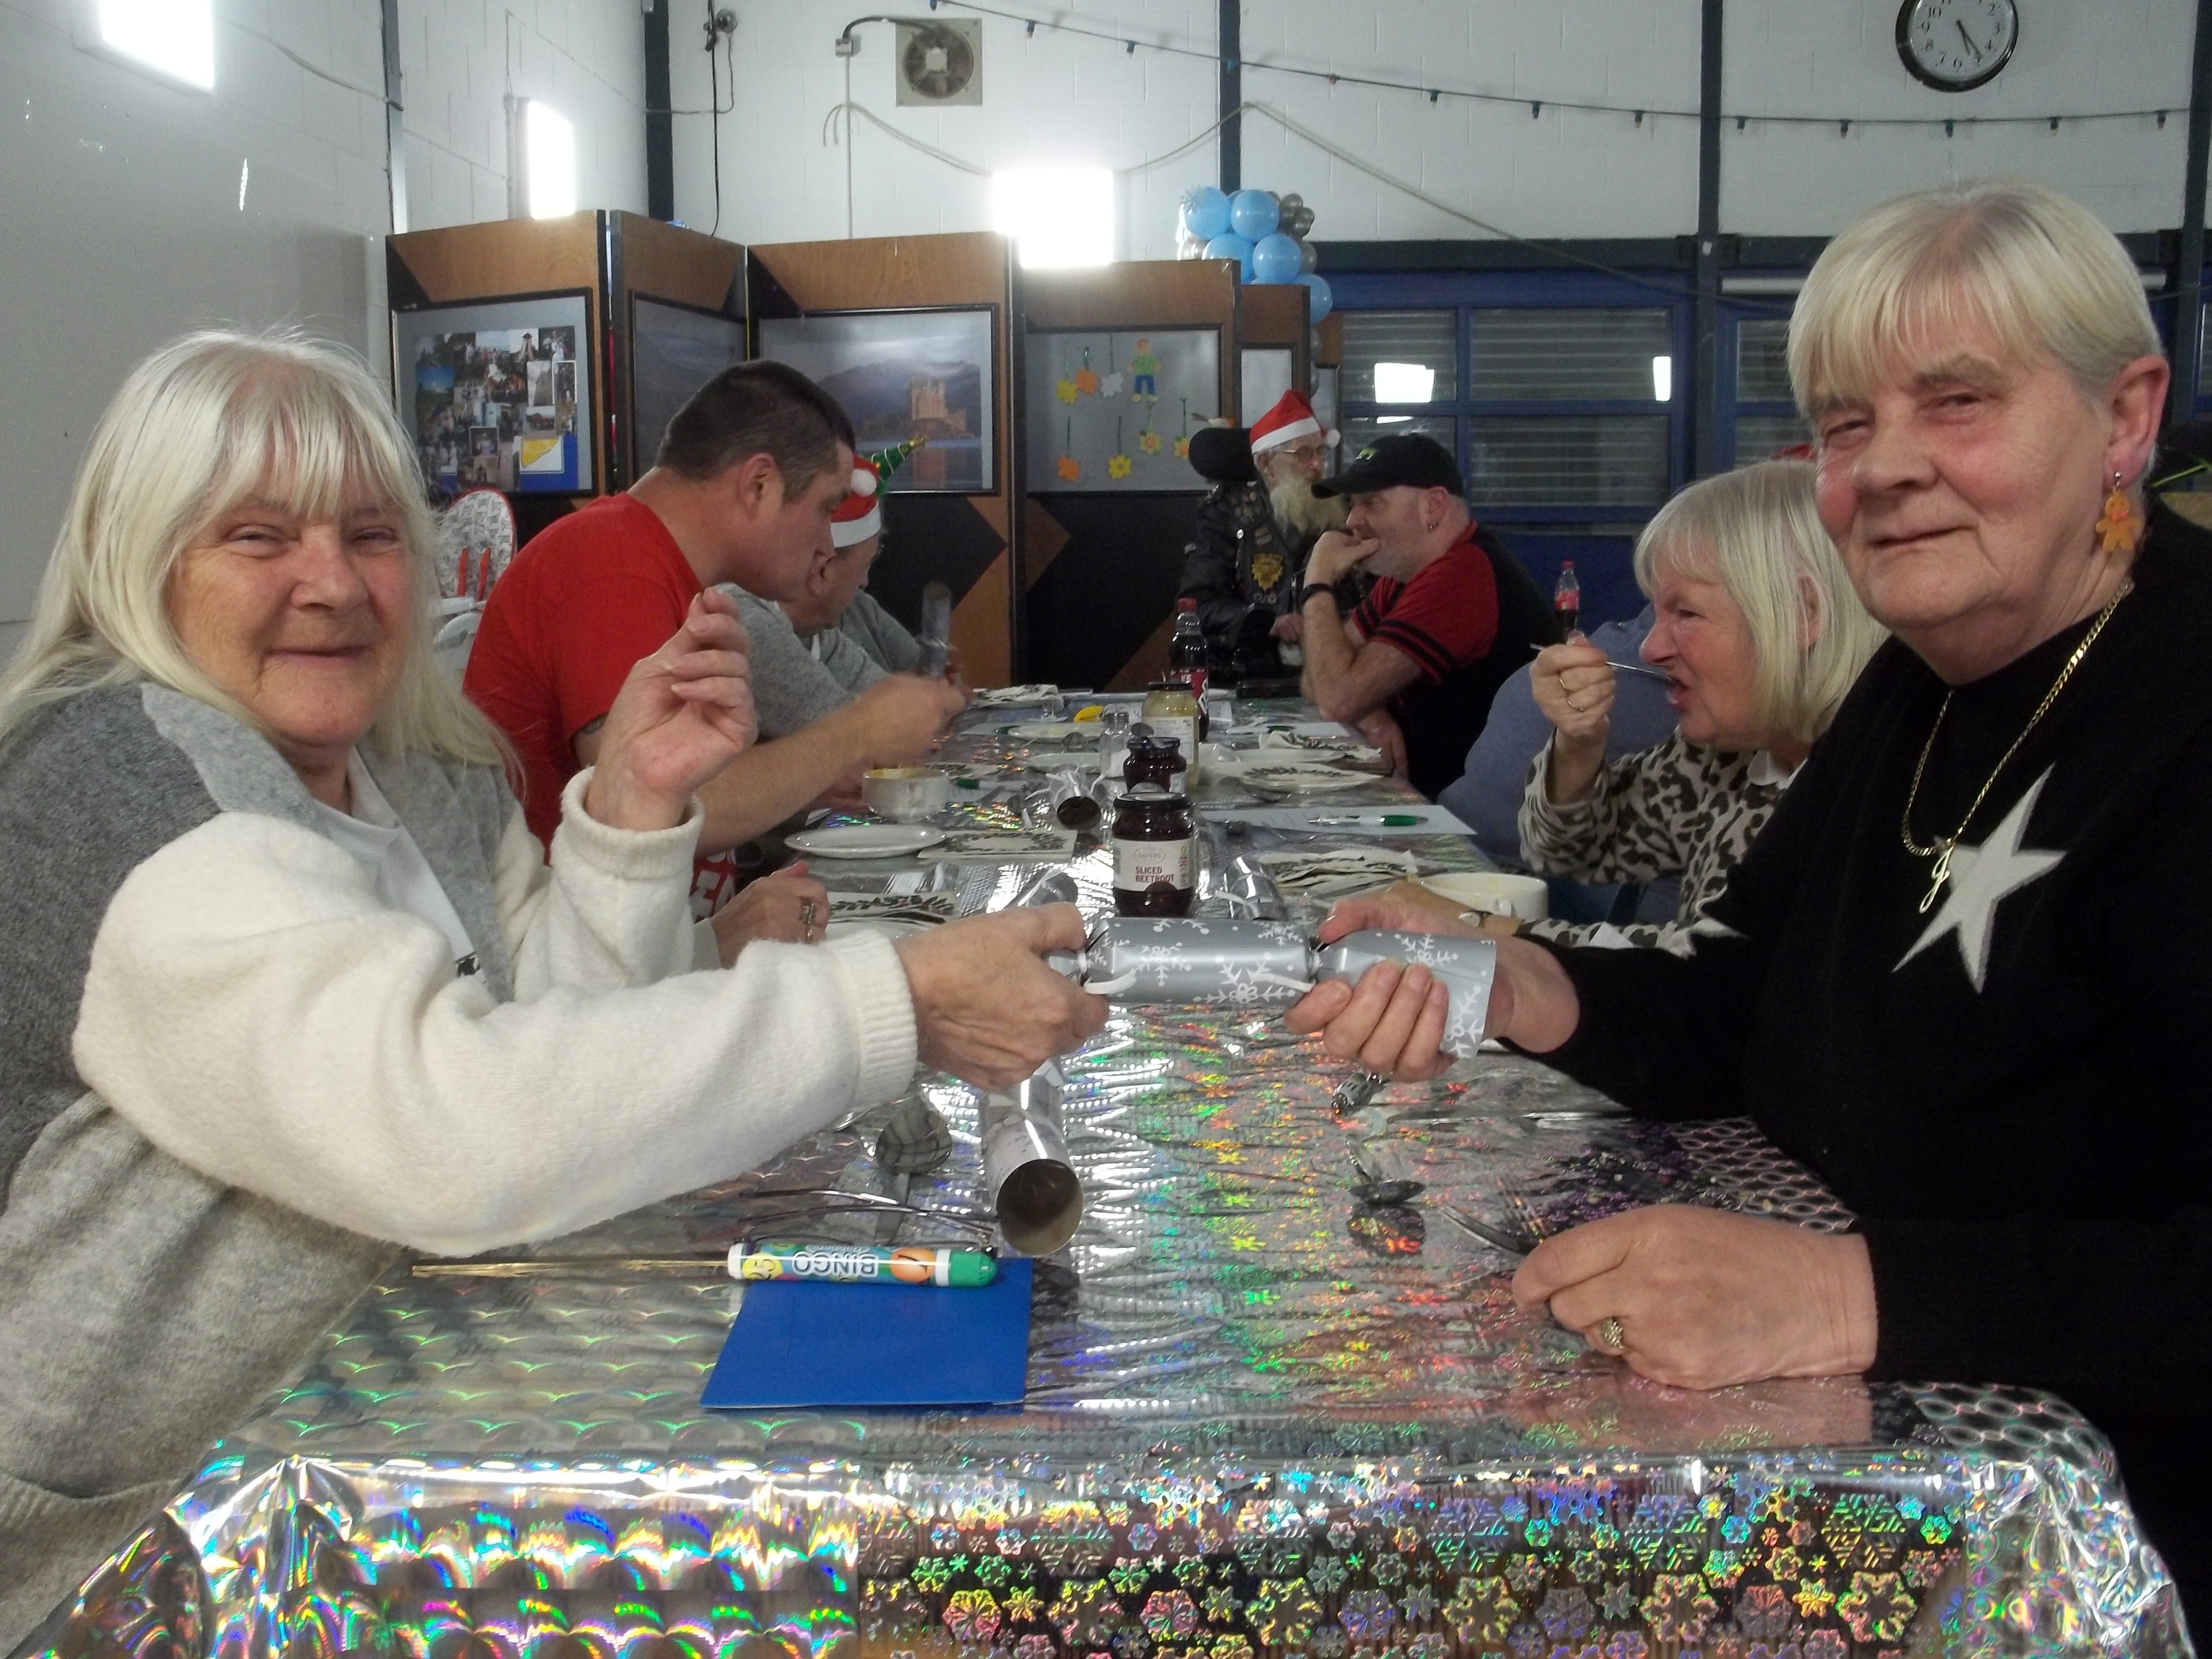 Muirhouse Housing Association hosts weekly dinner party